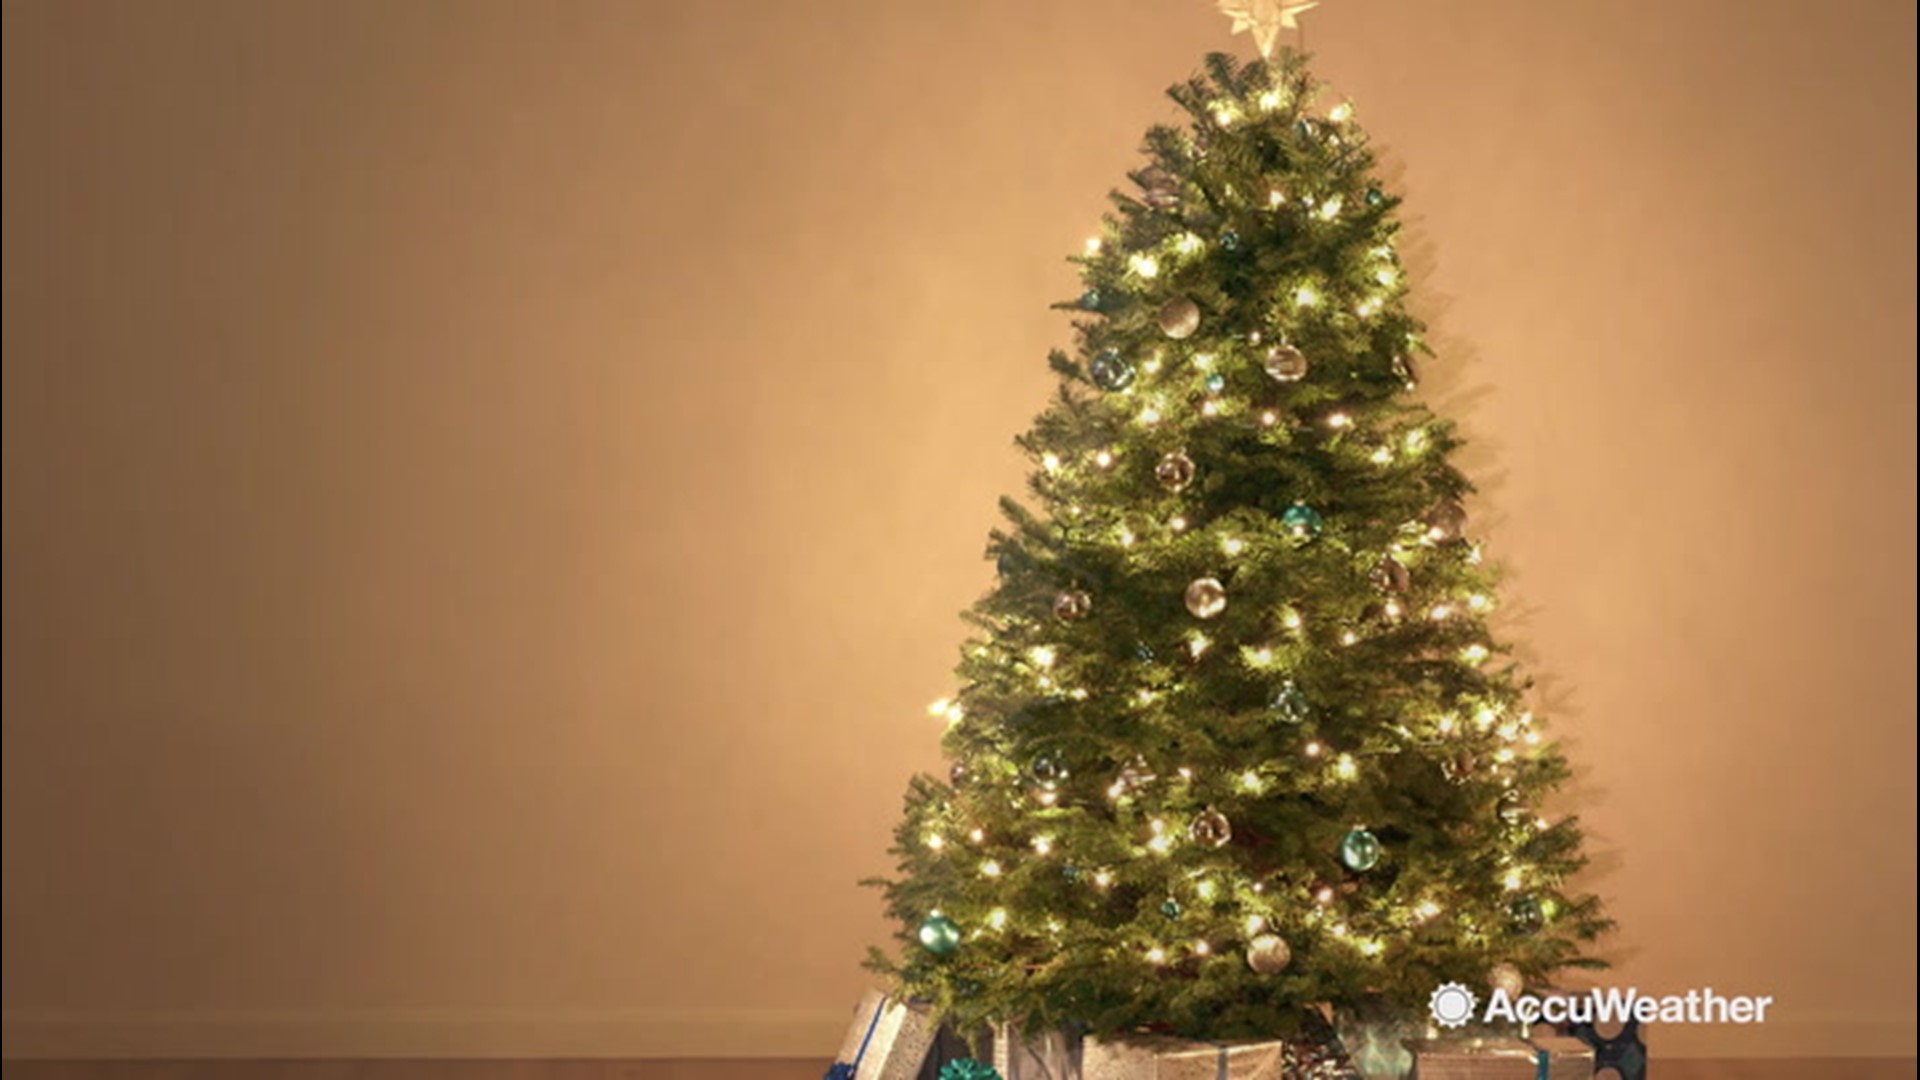 Having a tree is essential to celebrating the Christmas holiday. If you're getting a real tree, you should know which type is right for you.